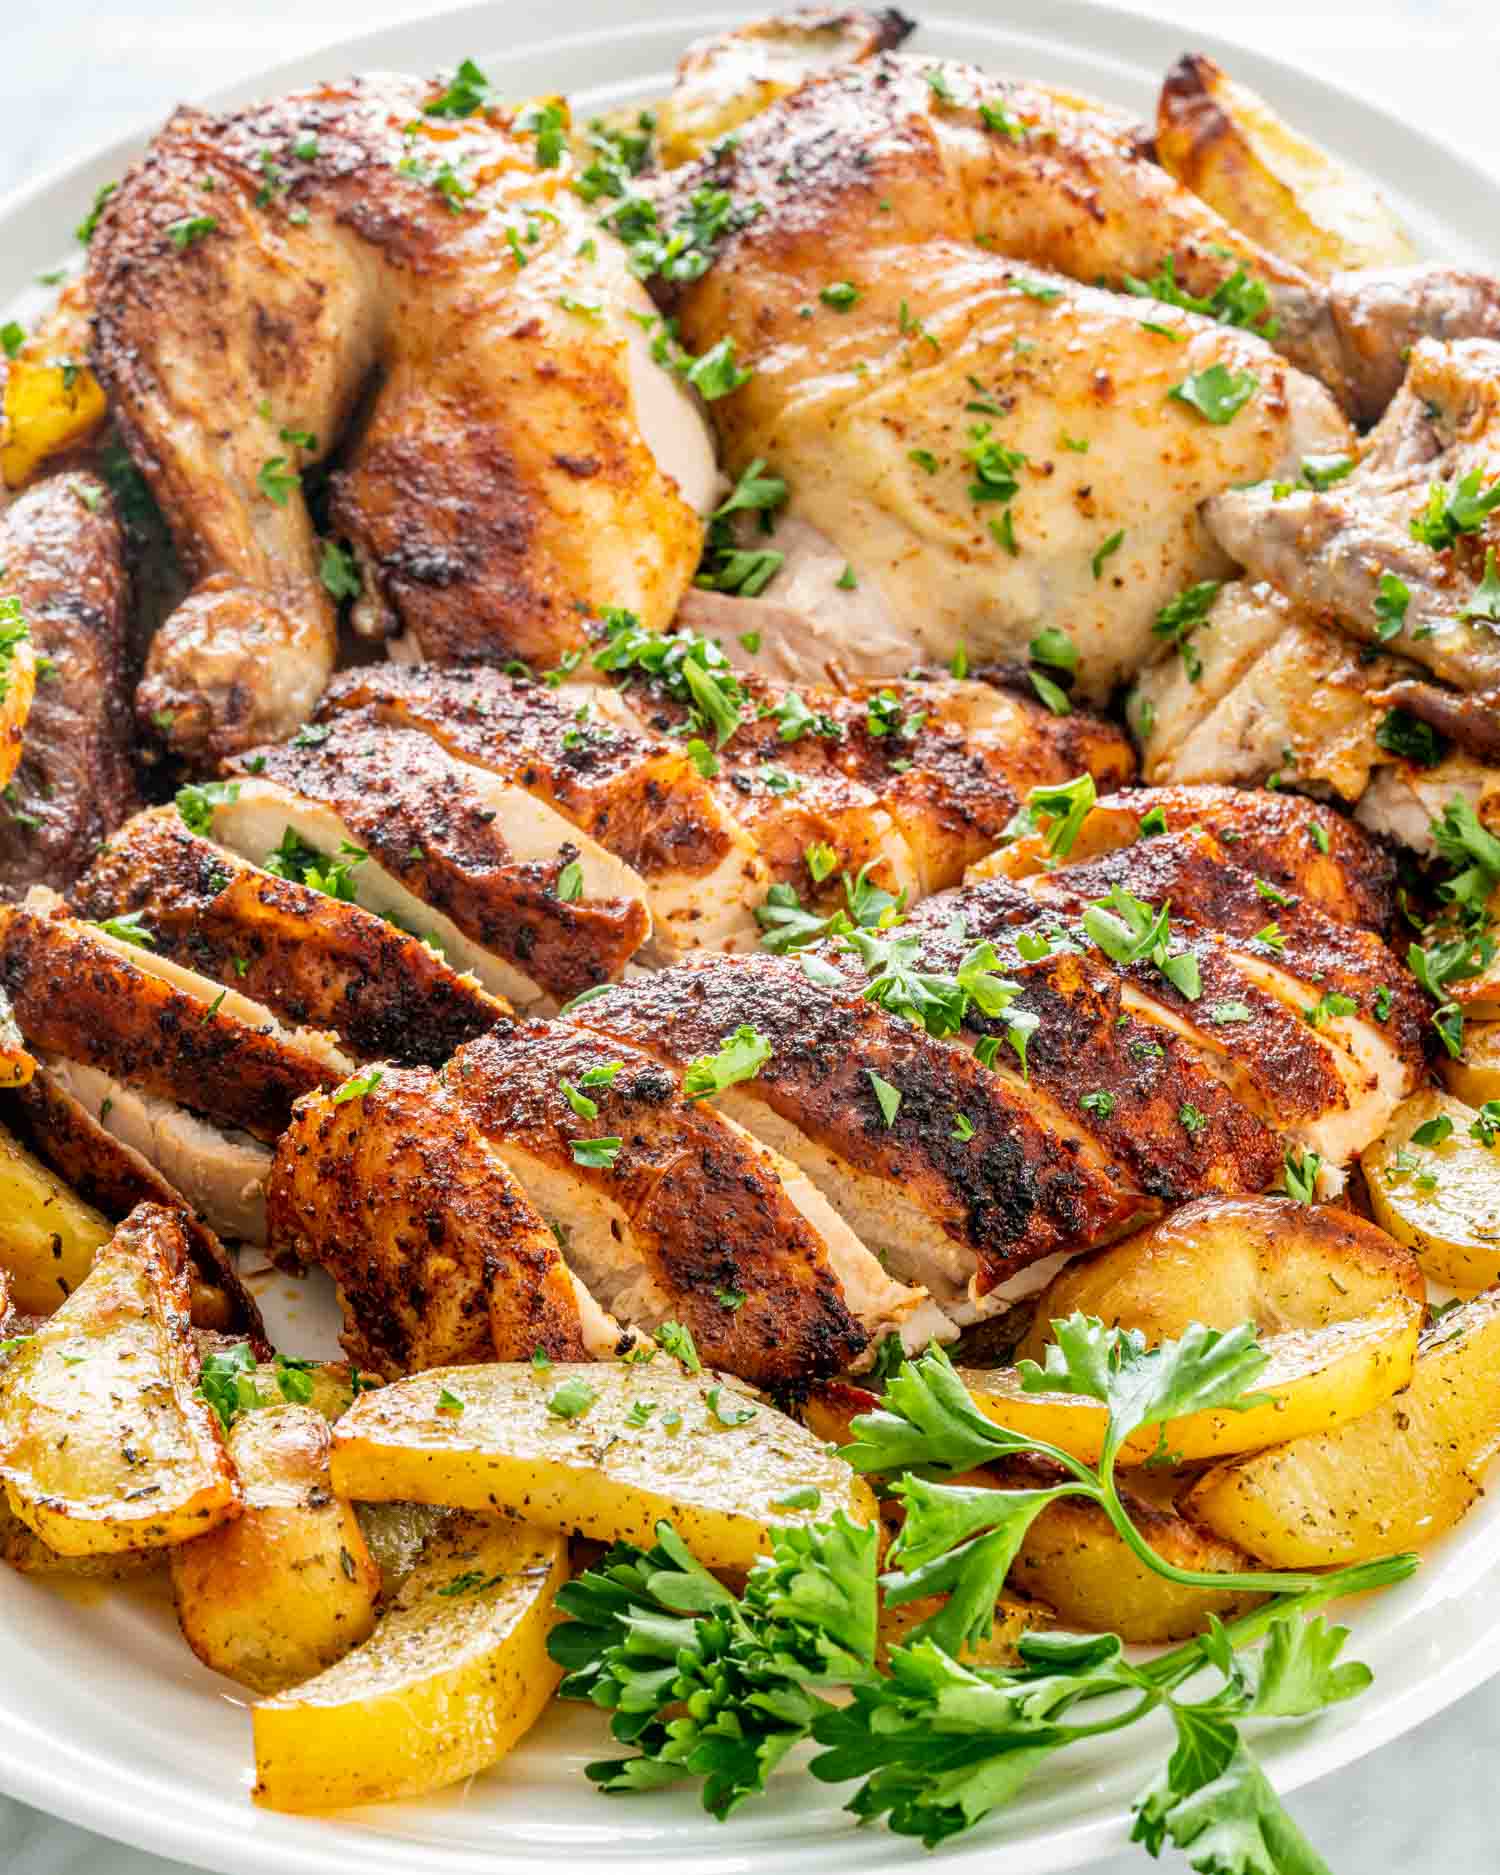 a roast chicken carved up on a platter with some roasted potatoes.